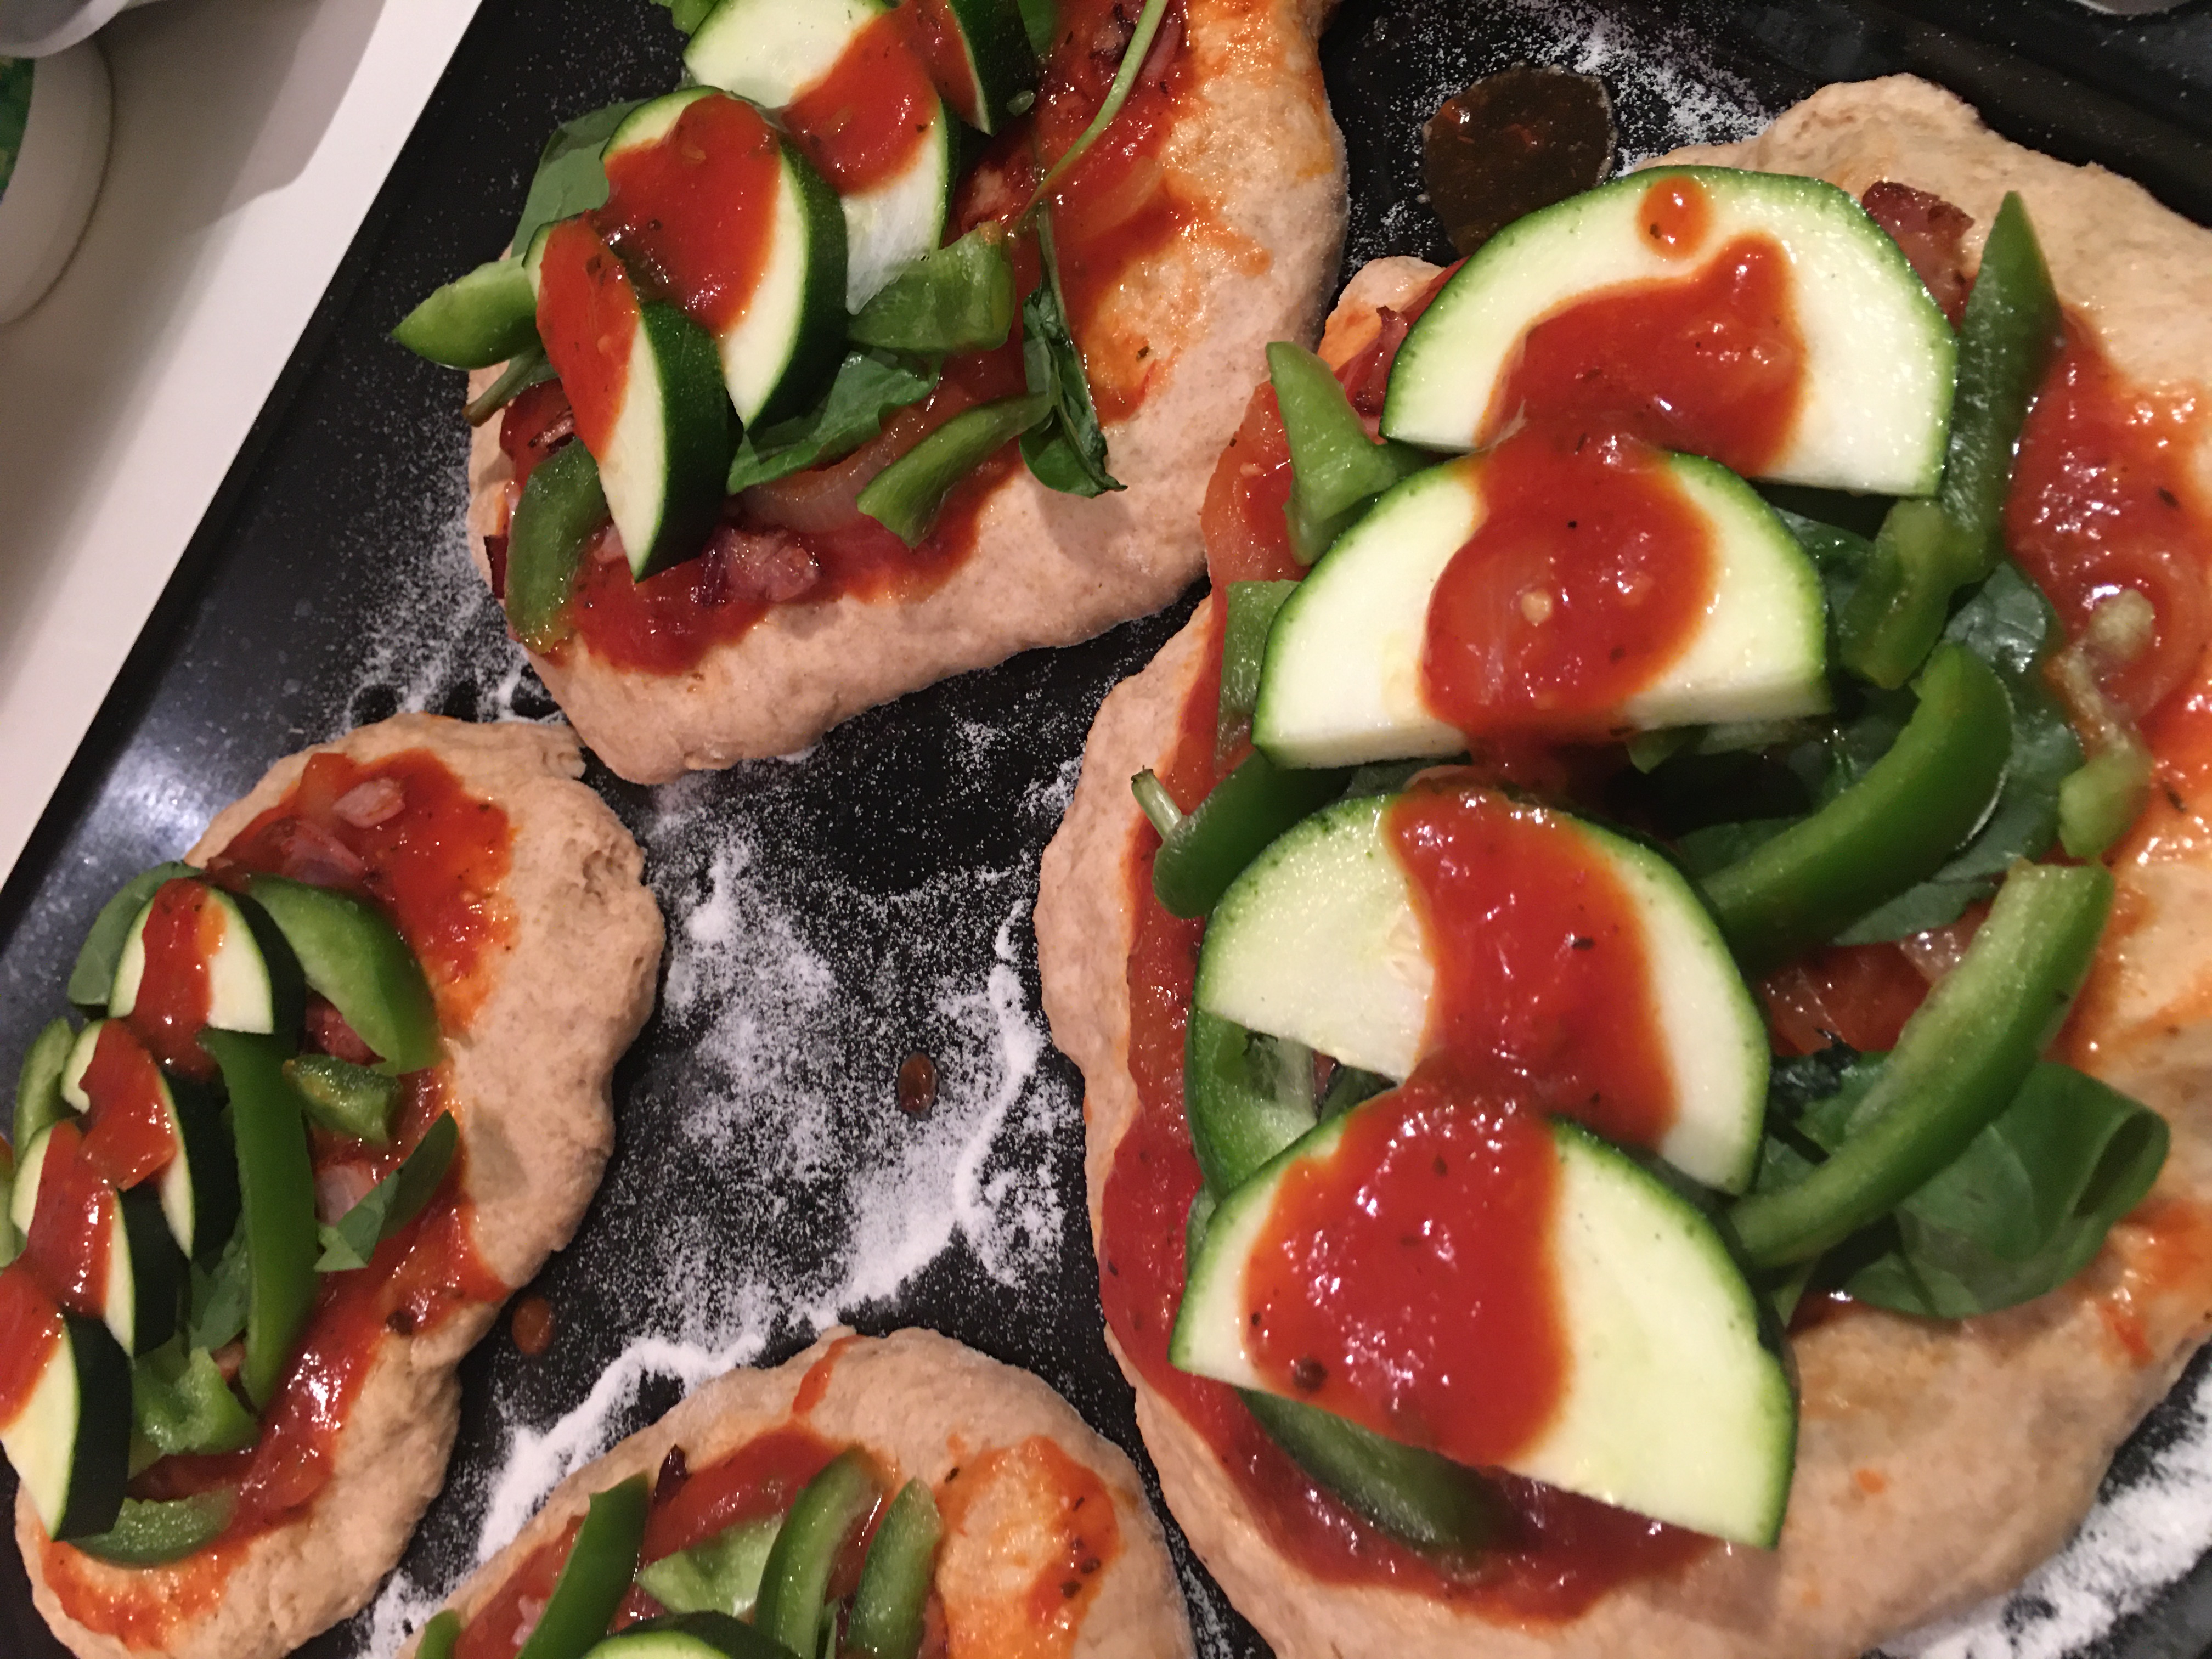 Creative pizzettes for a family meal by Elizabeth Celi